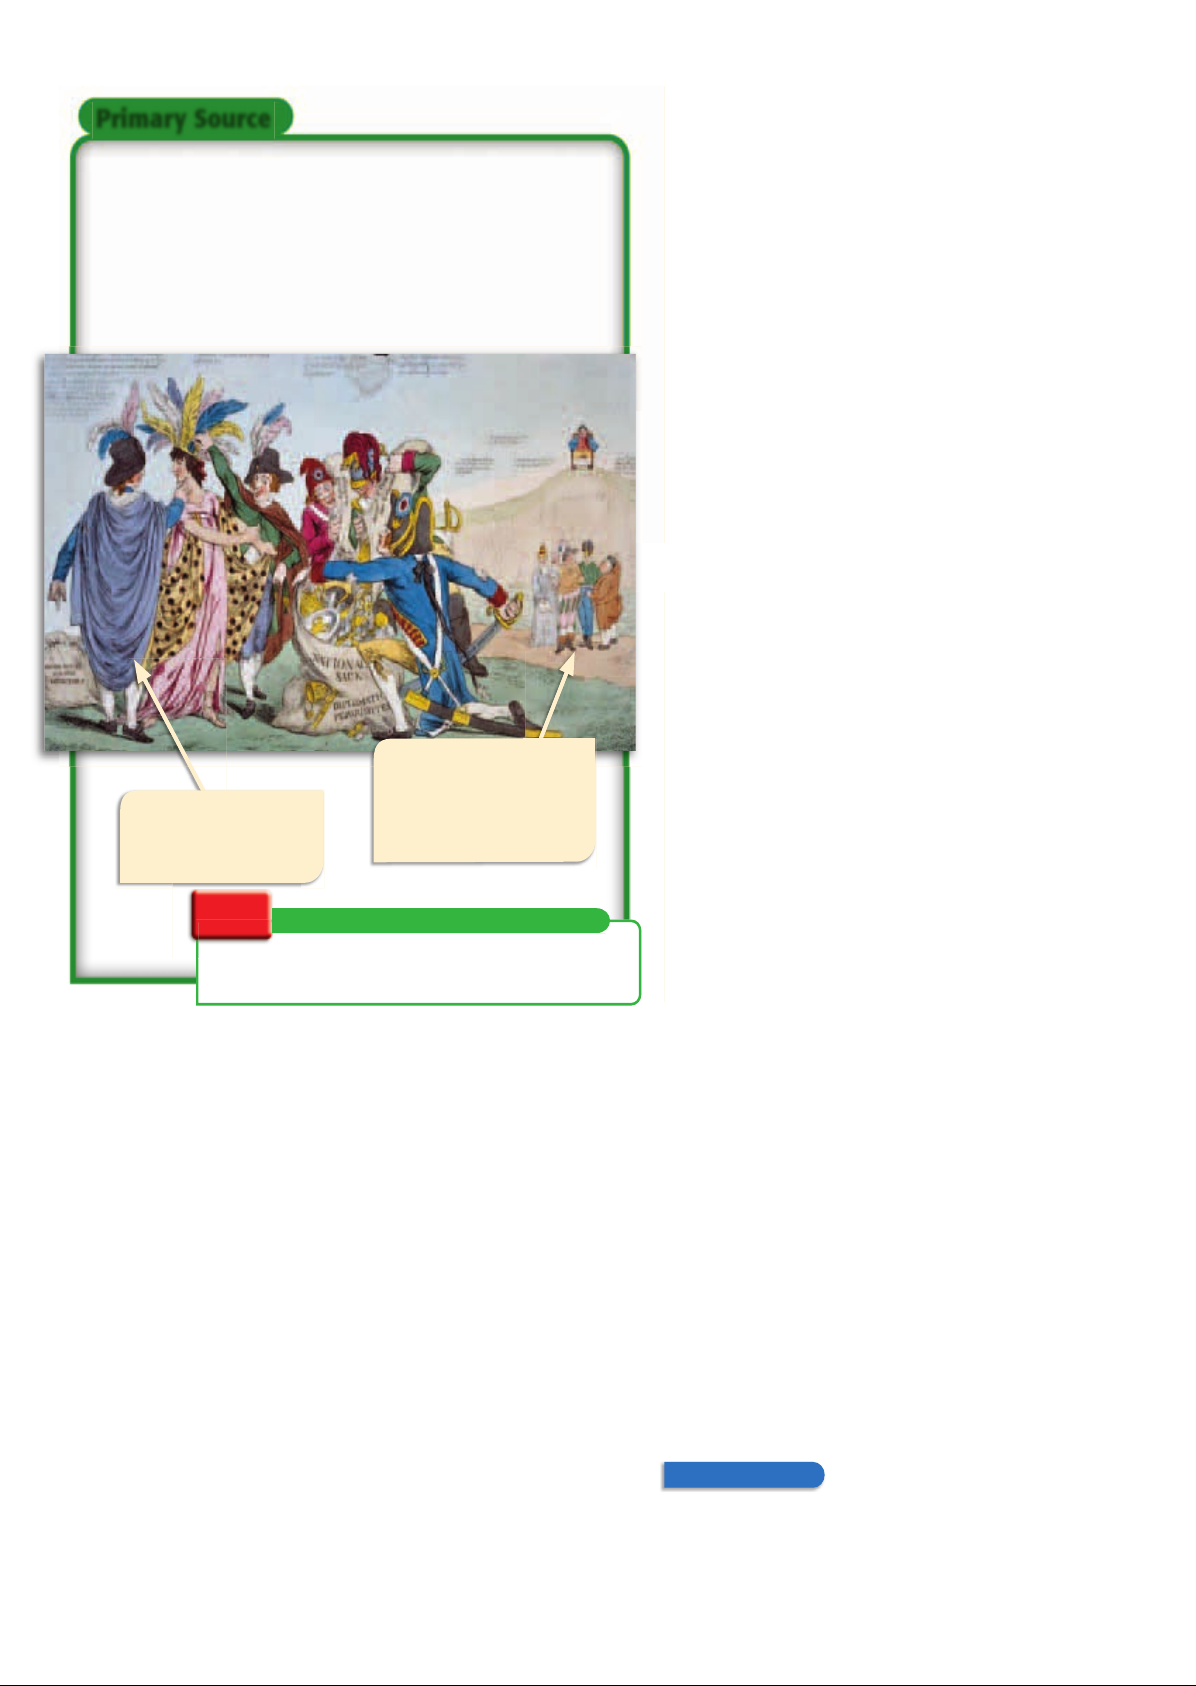 US_History_Textbook_8th_Grade_Chapter_6_Launching_the_Nation_bQLeyRX Image-20